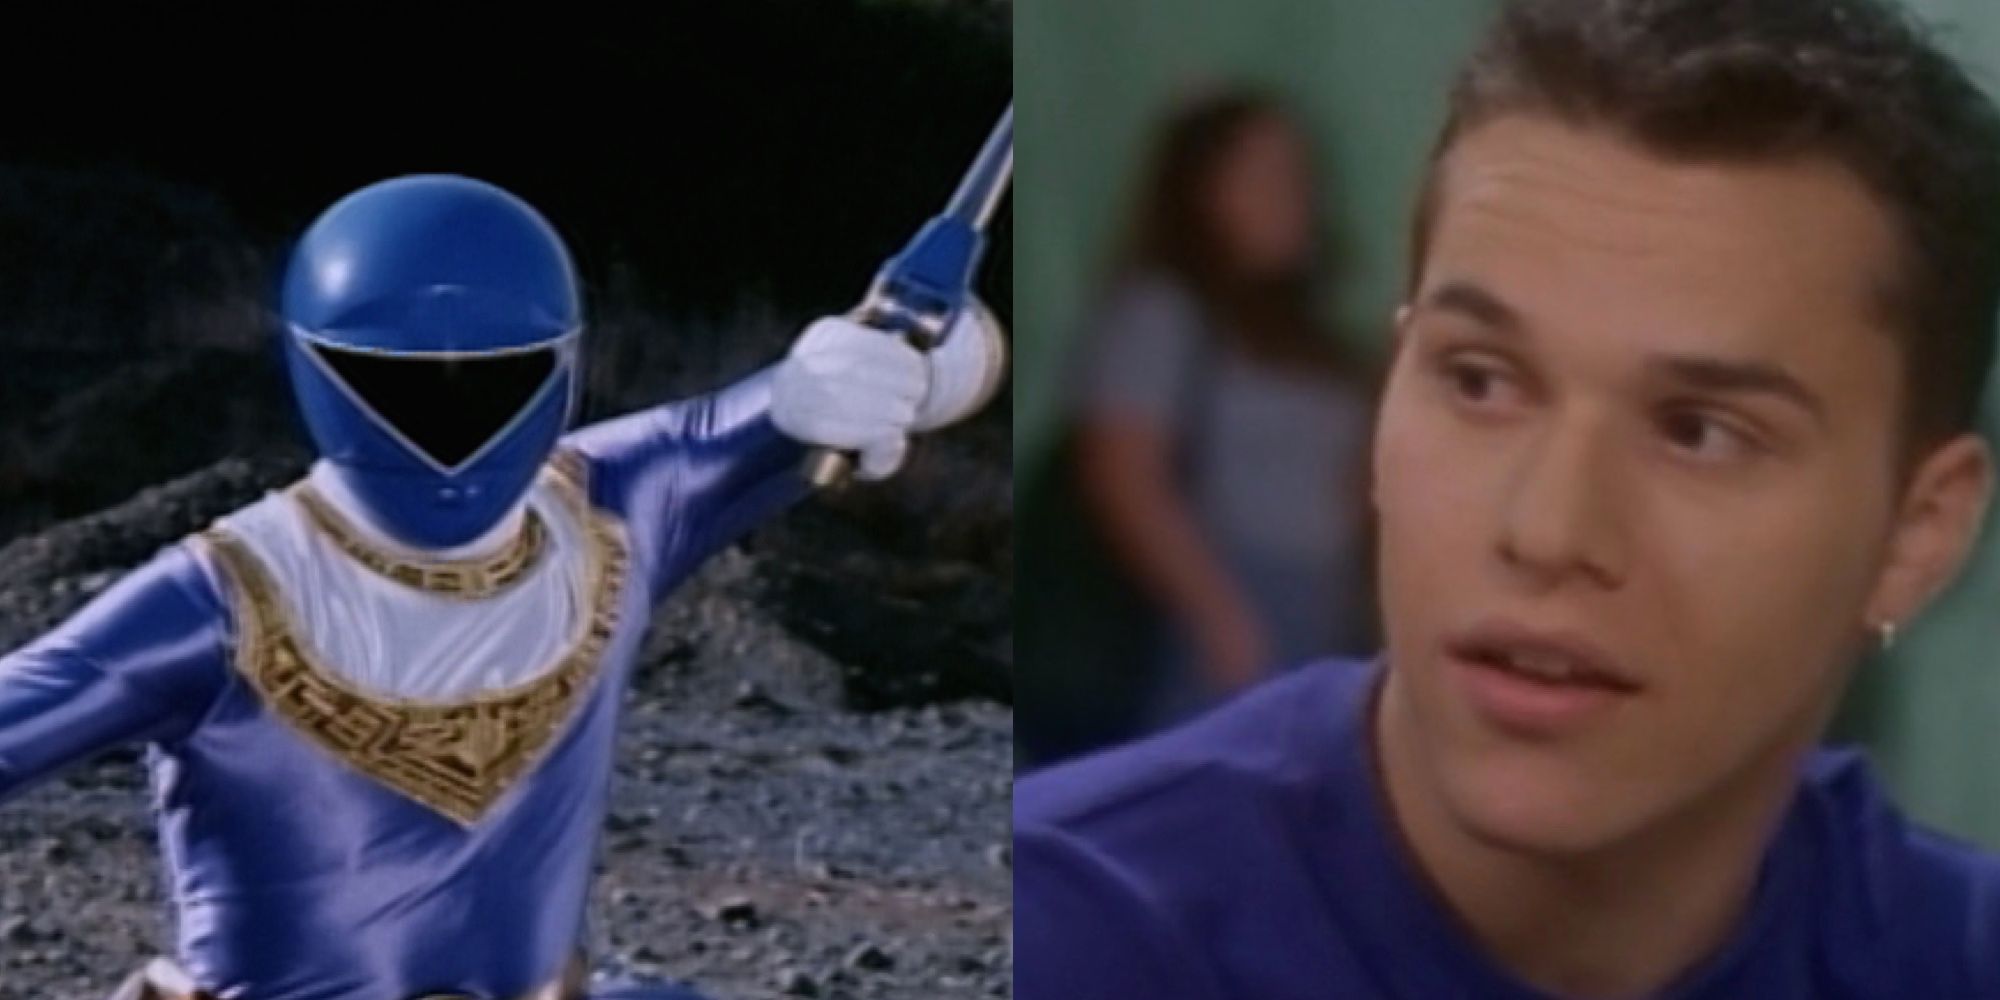 Rocky is the Blue Zeo Power Ranger